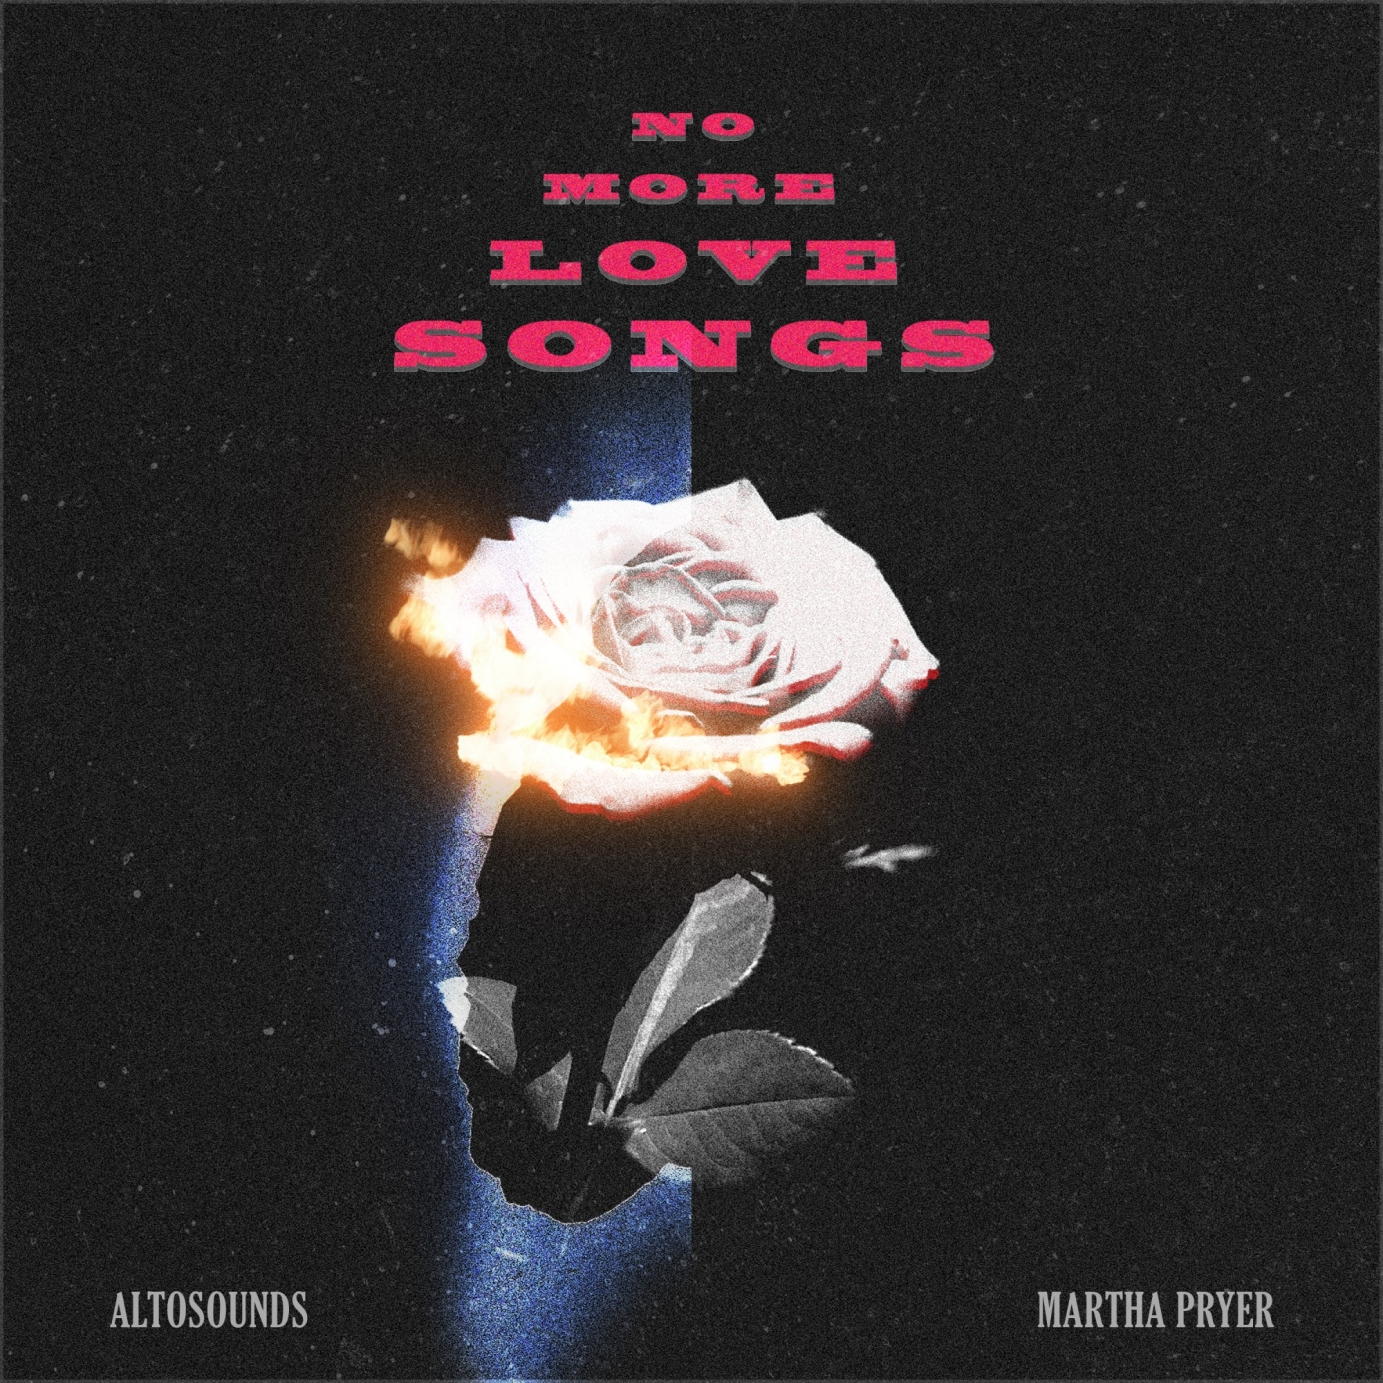 Cover Artwork for "No More Love Songs"